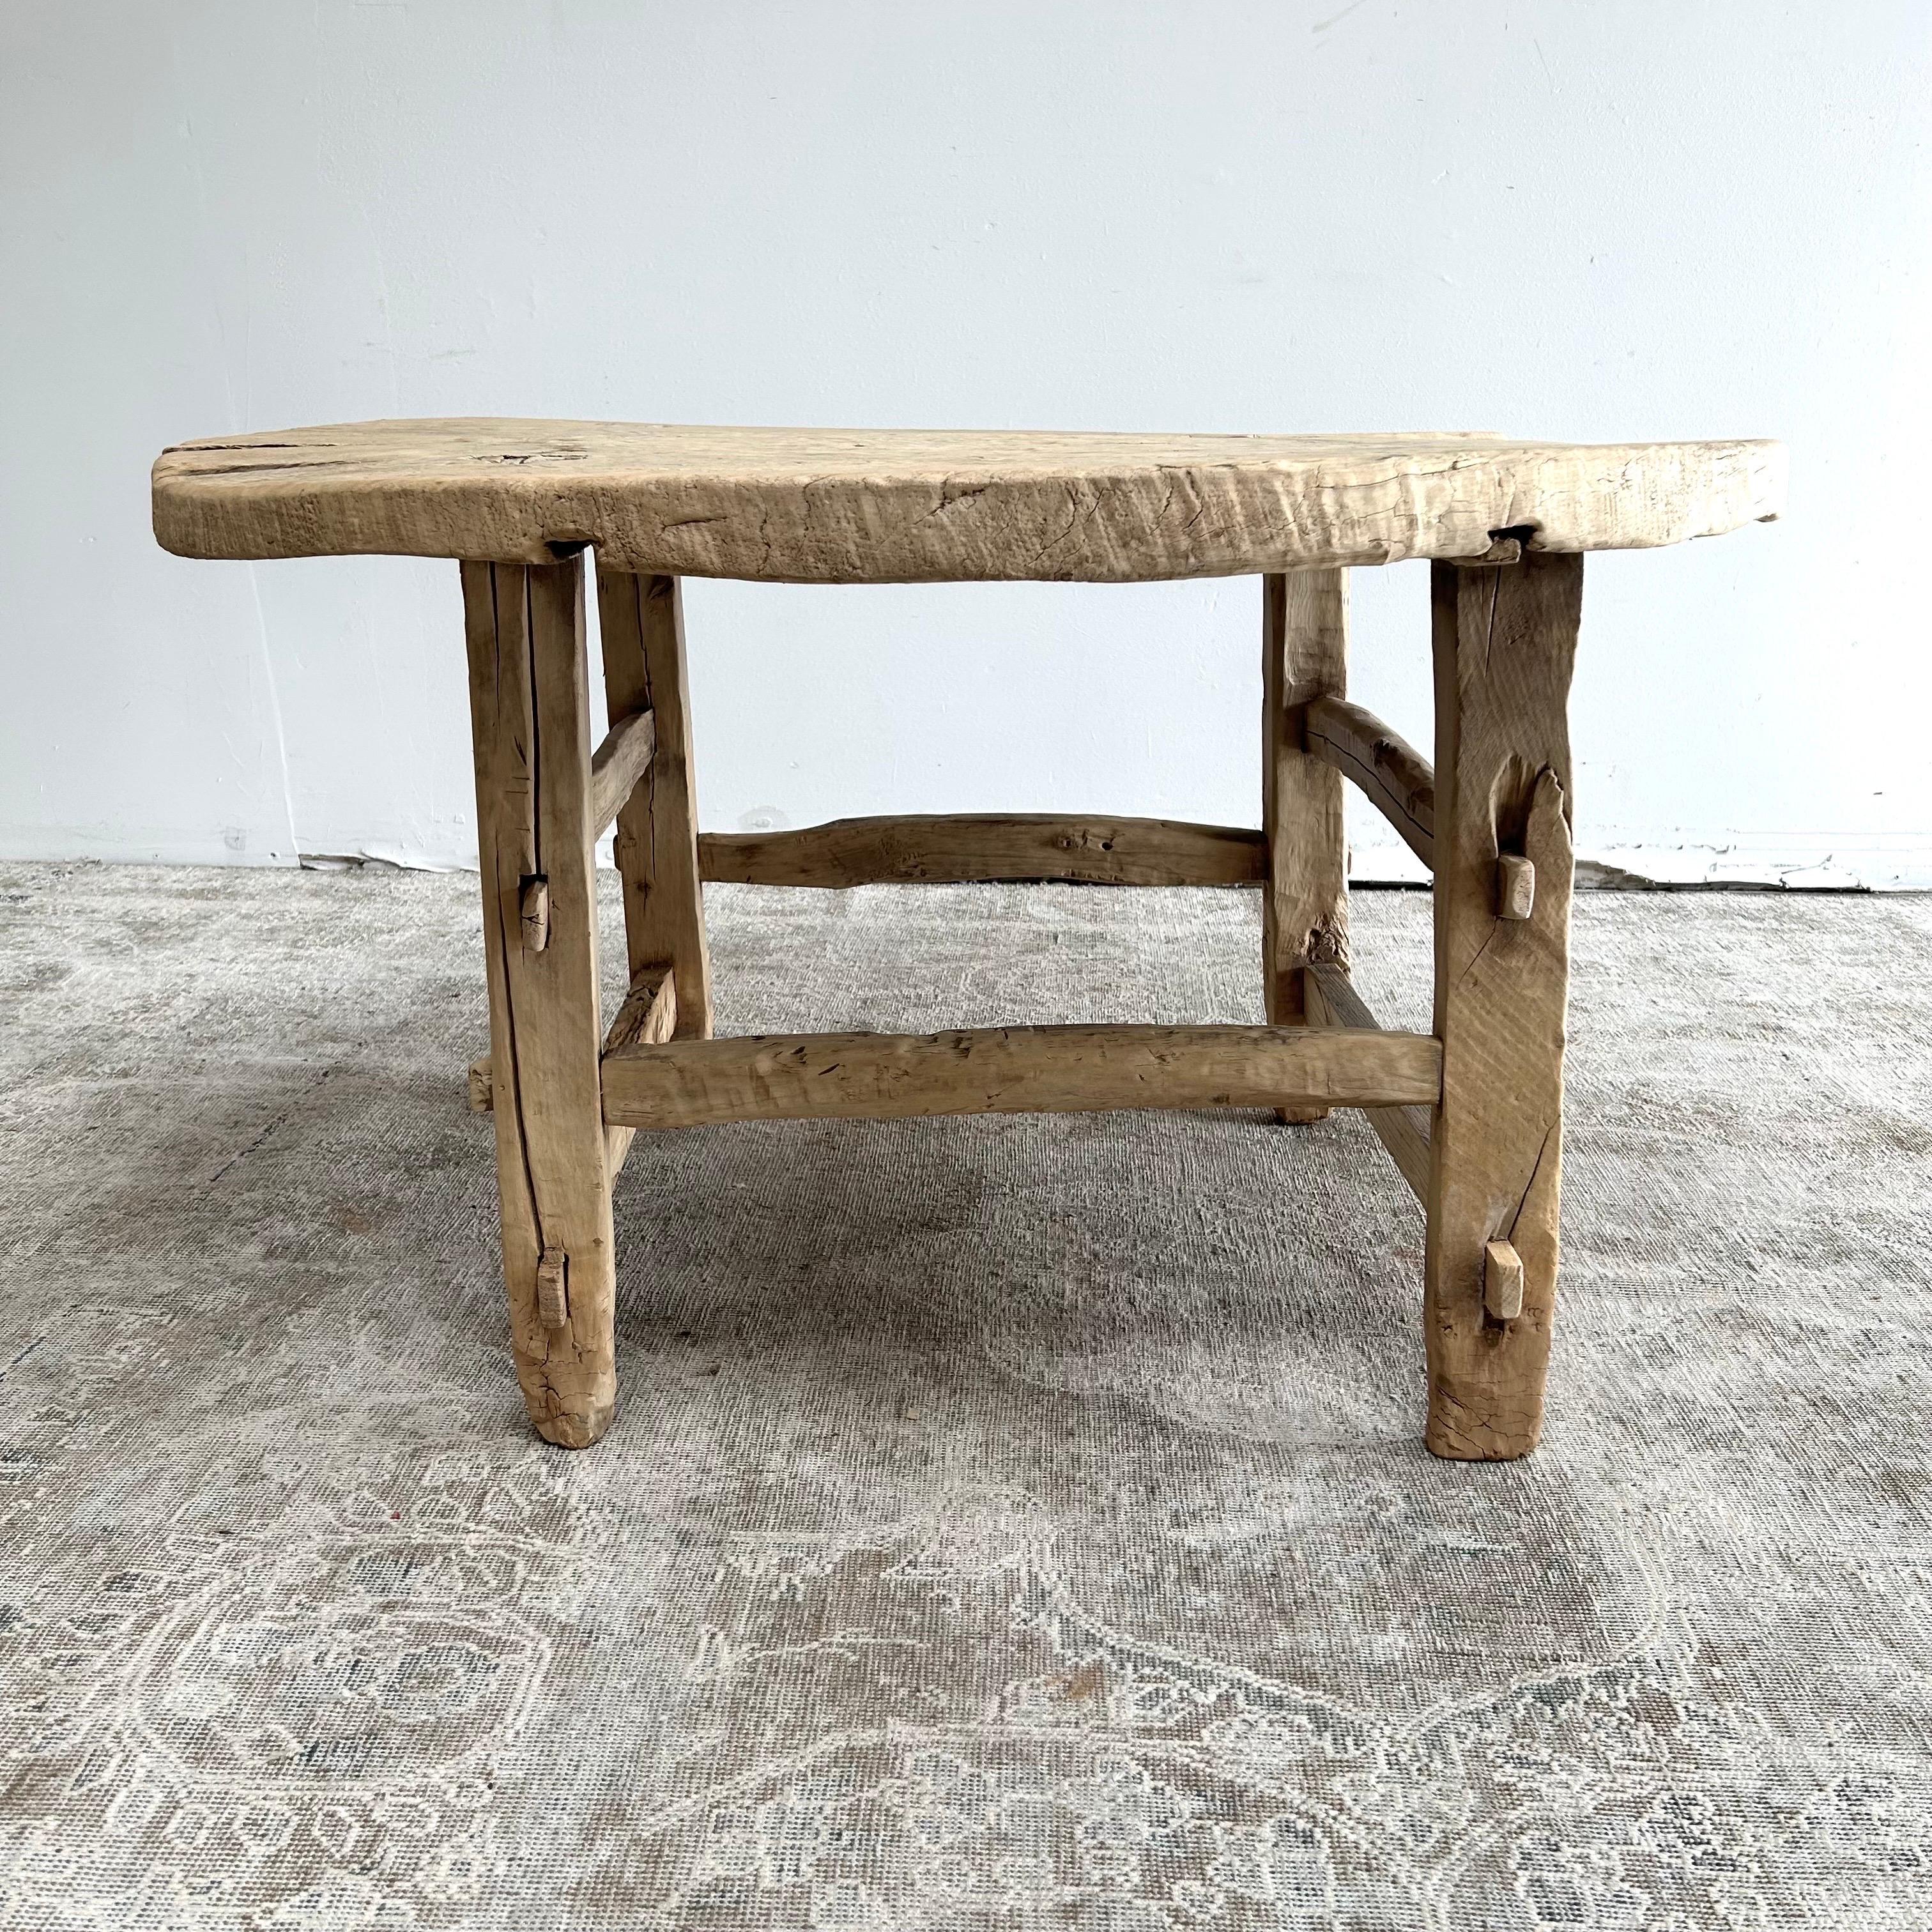 Elm coffee table 45”rd. X 26”h
Vintage antique elm wood coffee table with beautiful antique weathered patina top Beautiful antique patina, with weathering and age, these are solid and sturdy ready for daily use, use as a coffee table or entry bench.